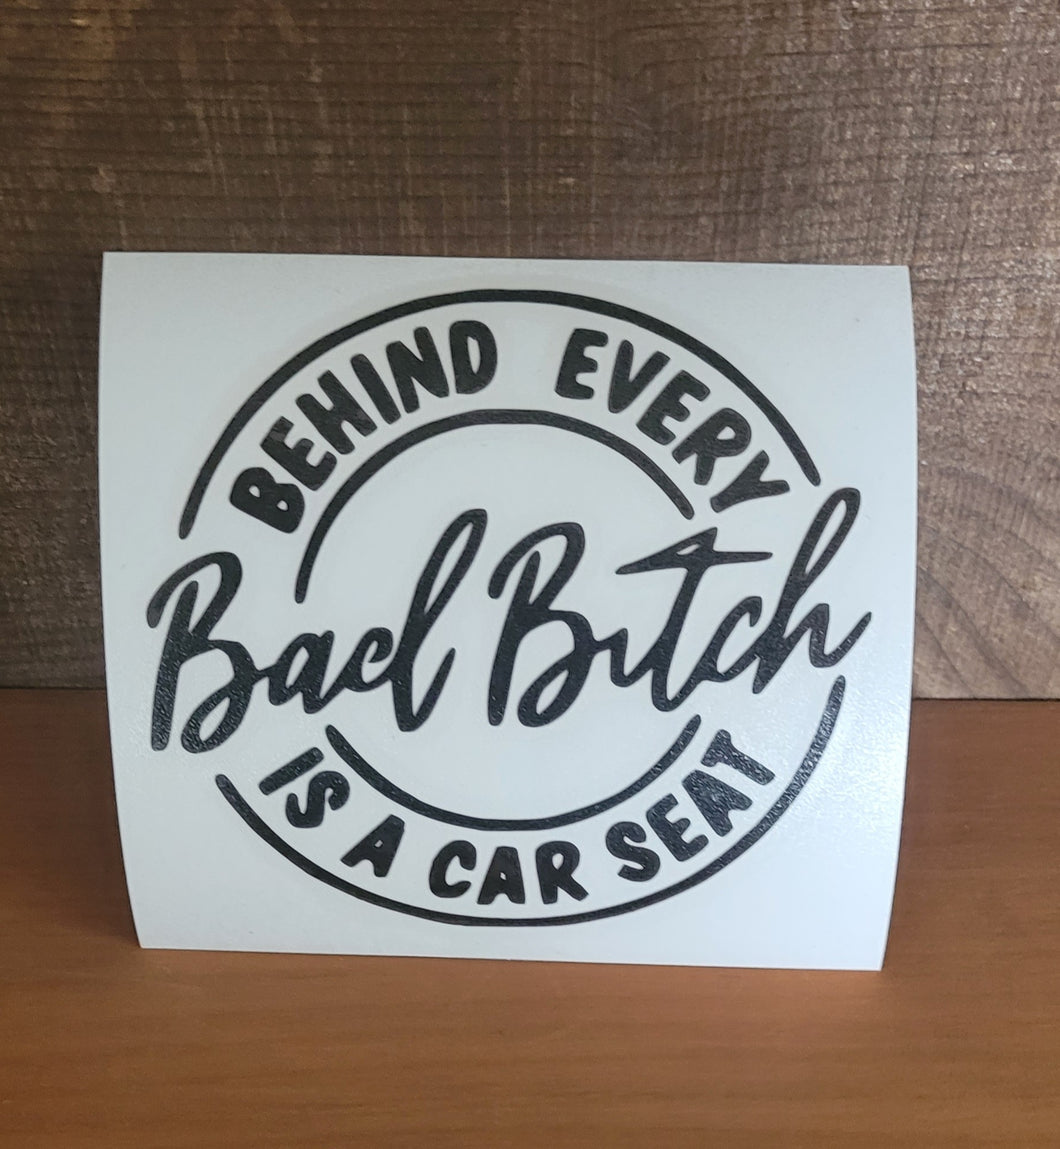 Behind Every Bad Bitch is a Car Seat